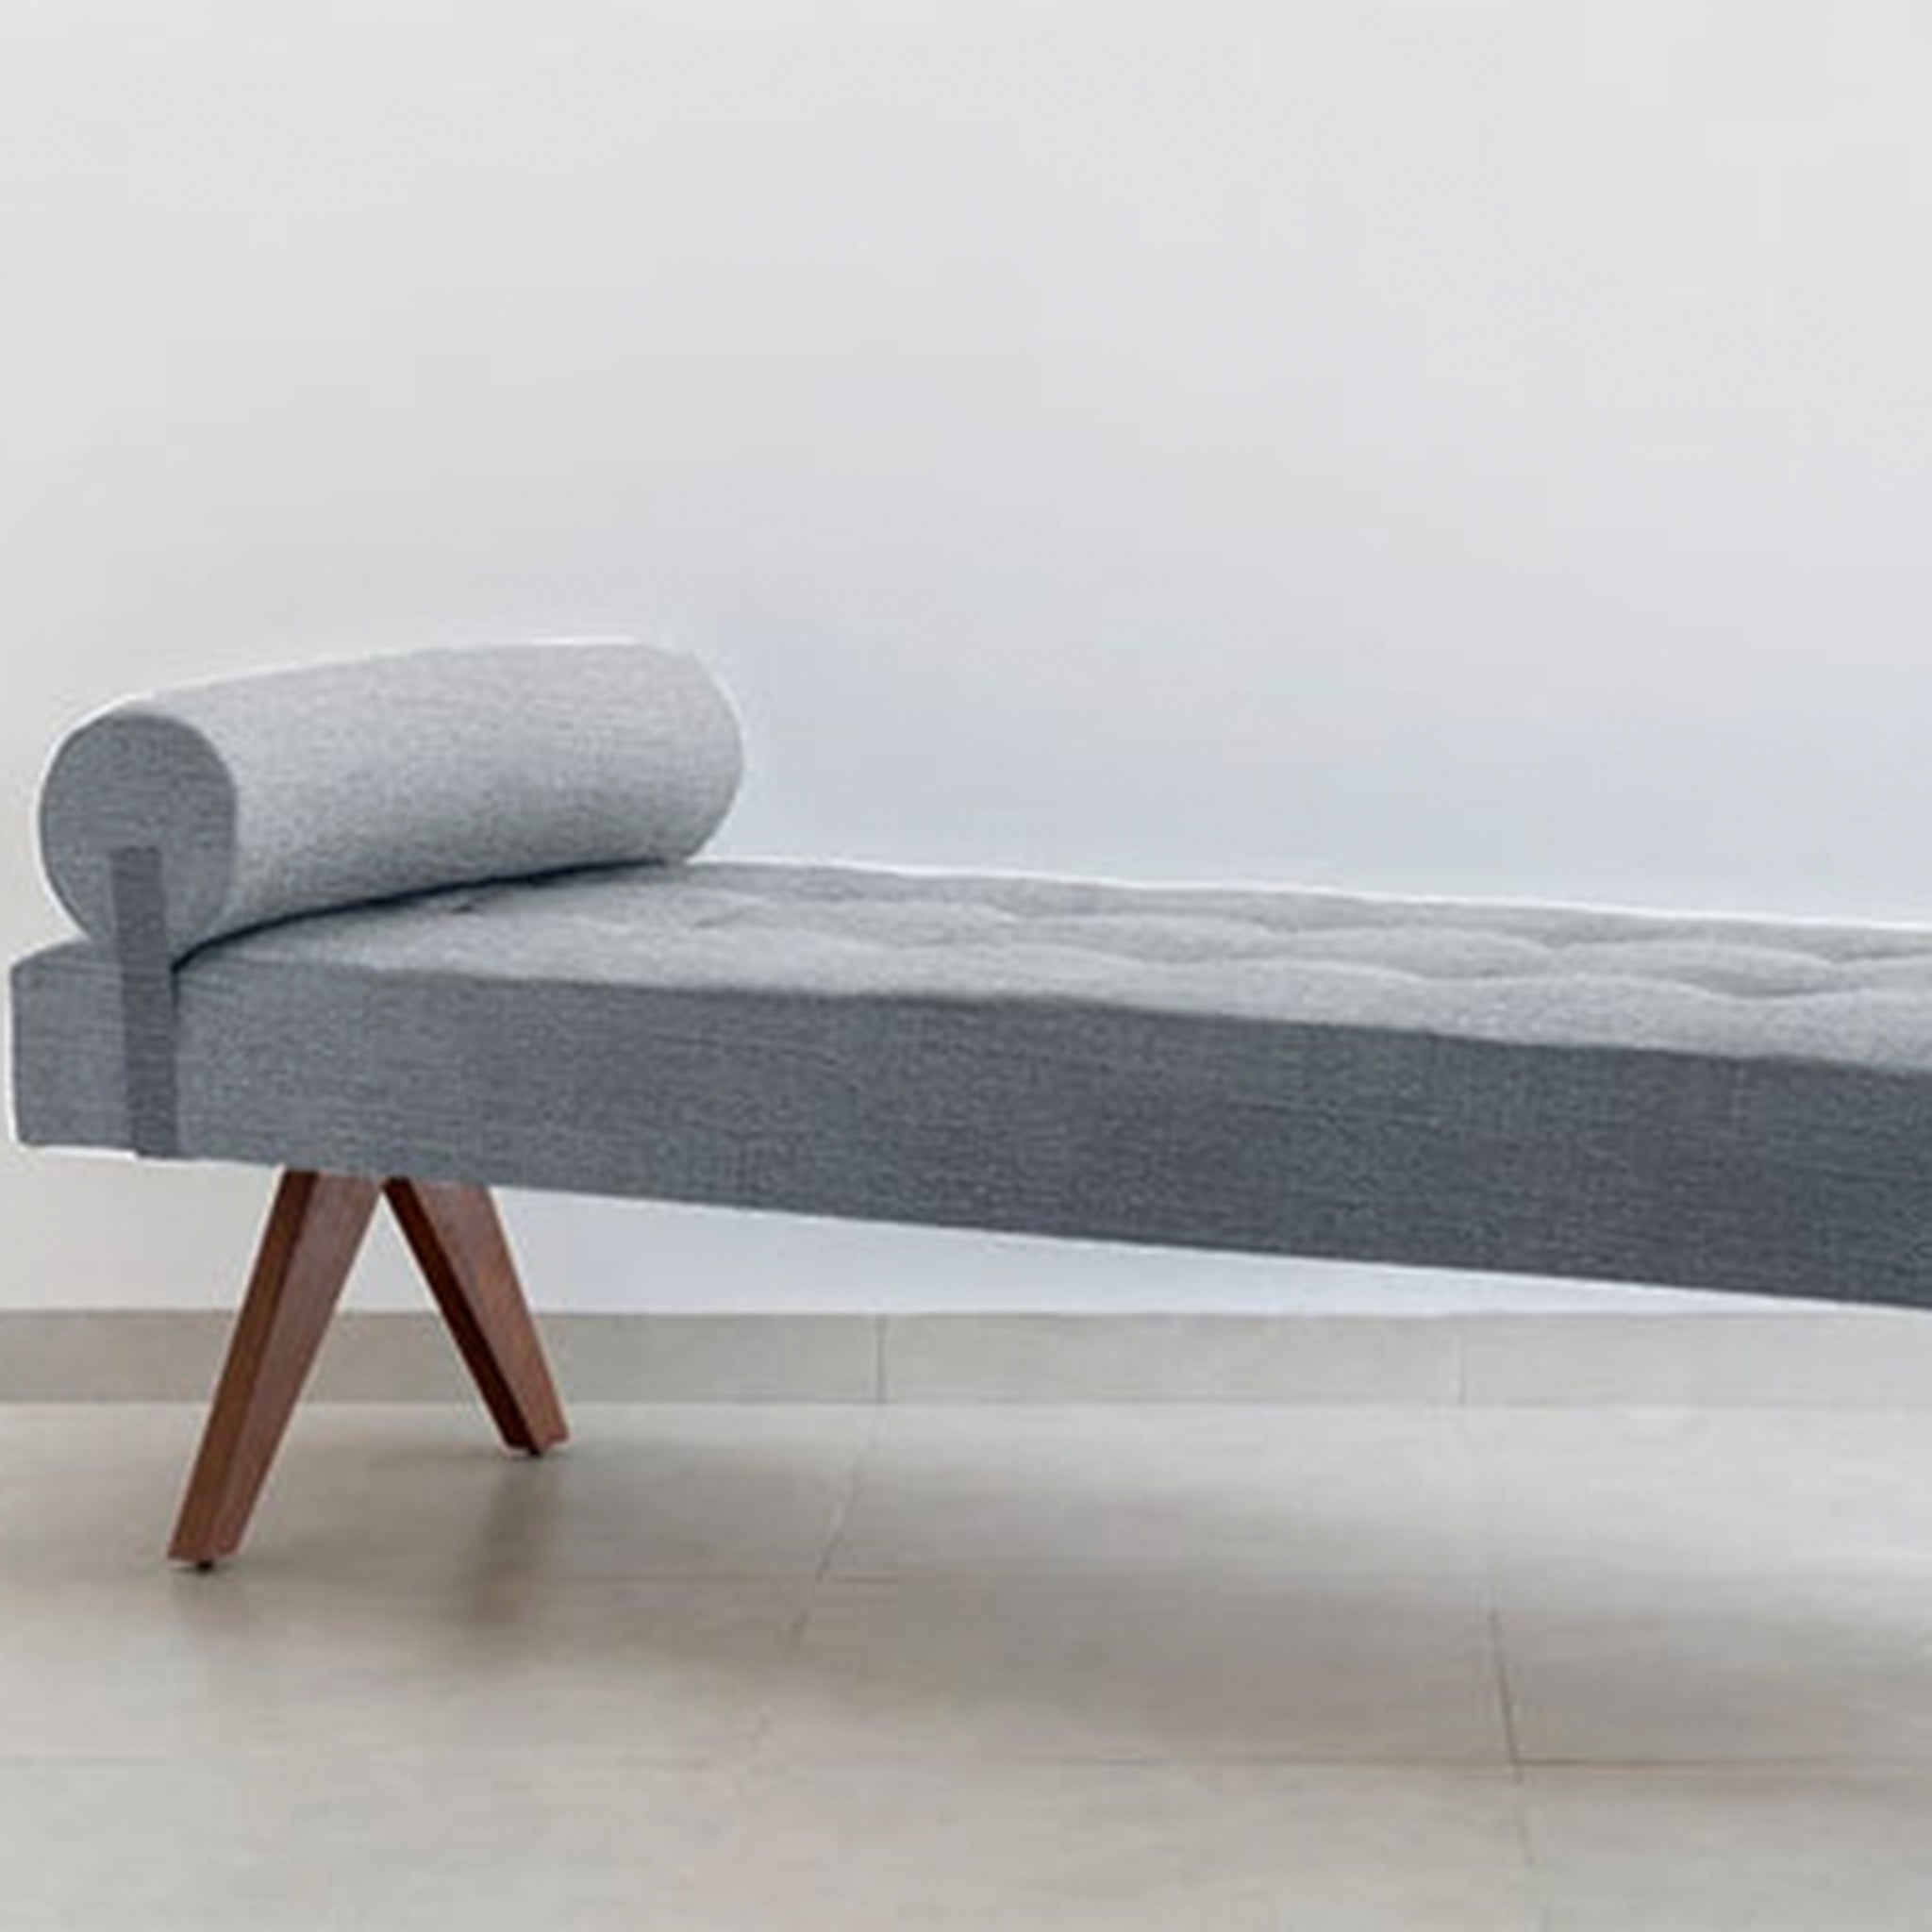 The Jack Daybed with angled wooden legs